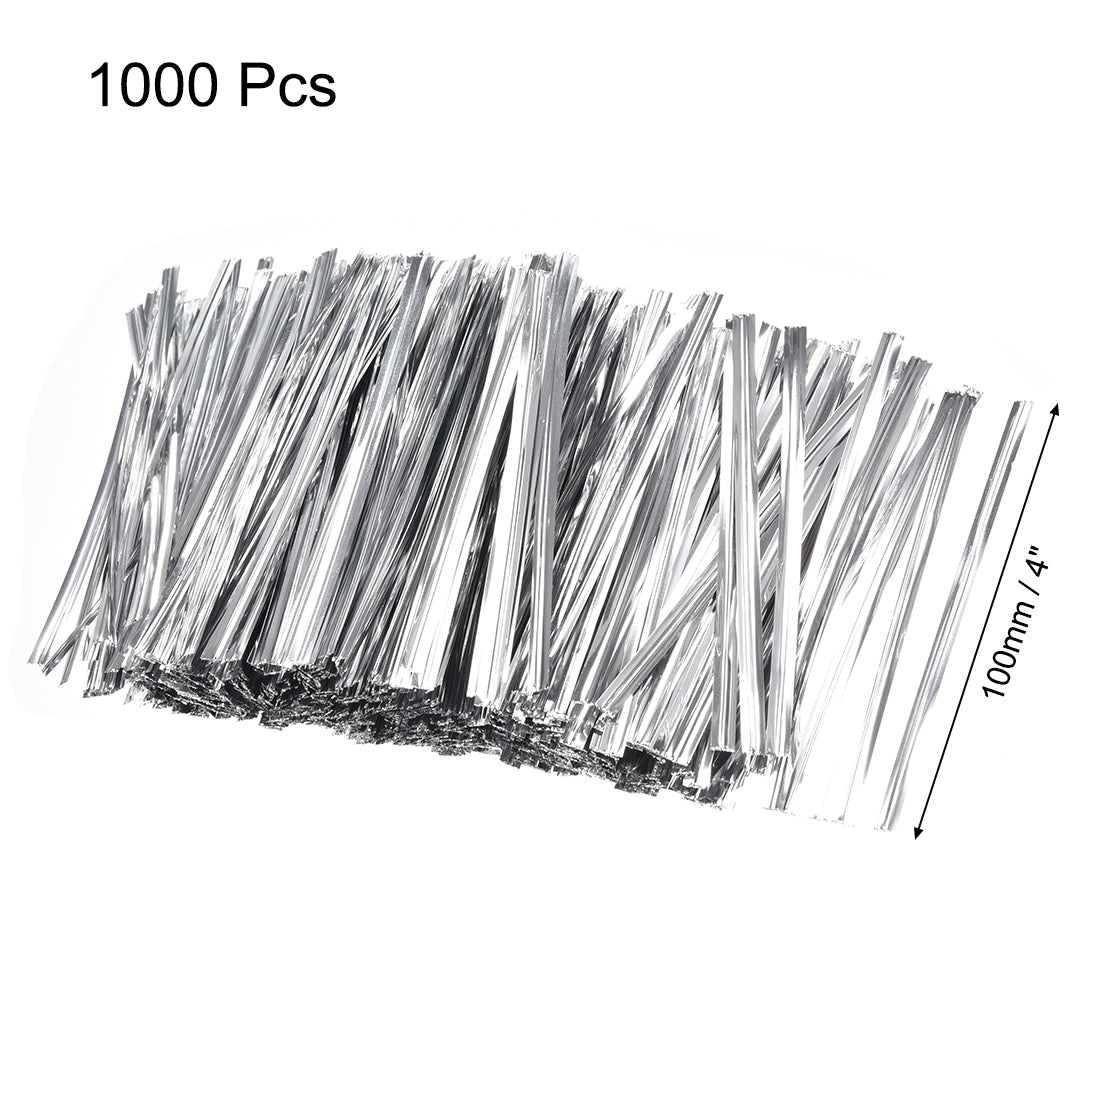 uxcell Uxcell Long Strong Twist Ties 4 Inches Quality Plastic Closure Tie for Tying Gift Bags Art Craft Ties Manage Cords Silvery 1000pcs